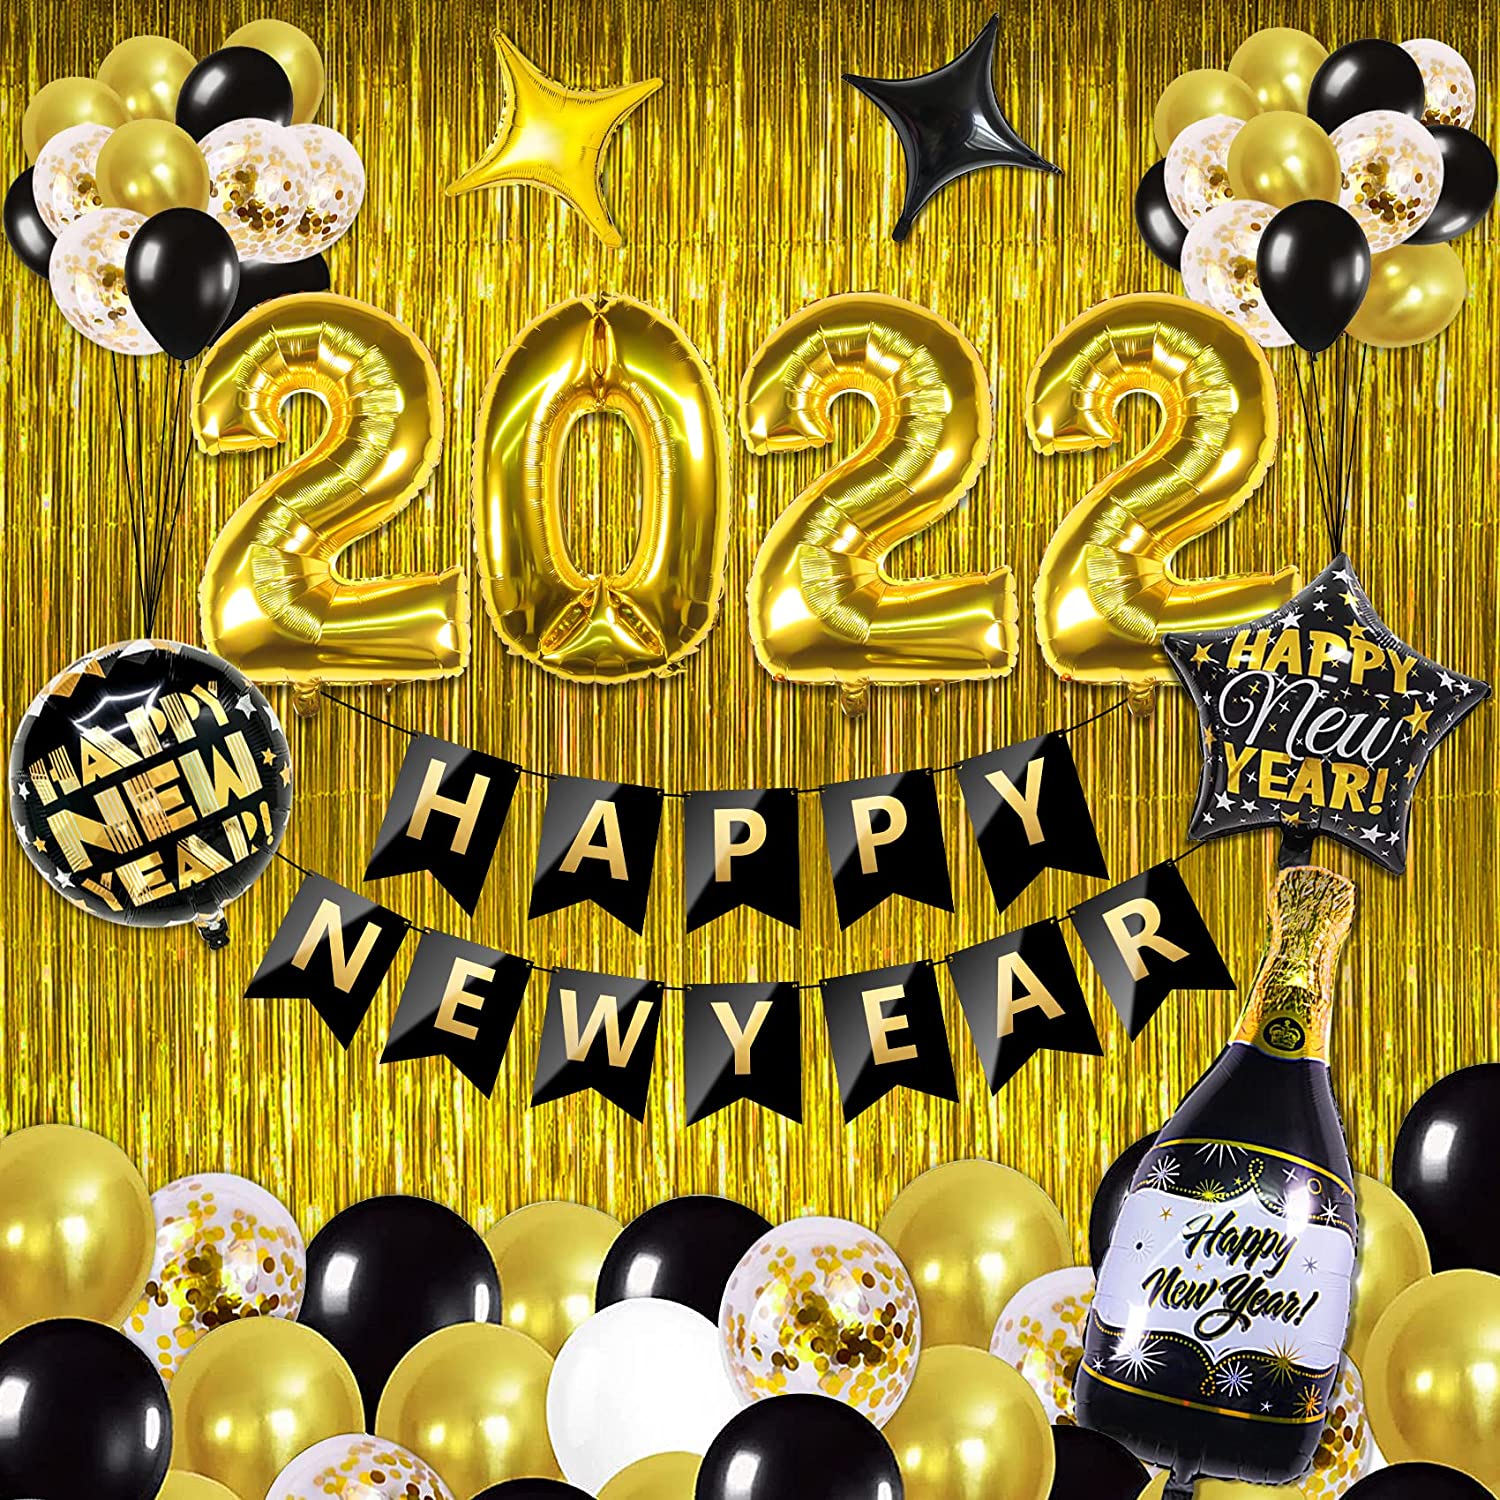 New Years Eve Party Supplies 2022-47 Pcs Happy New Year Decorations Kit,Includes Happy New Year Banner Gold Black Happy New Year Foil Balloons for Happy New Year Decorations 2022 Black Gold Happy New Year Decor 